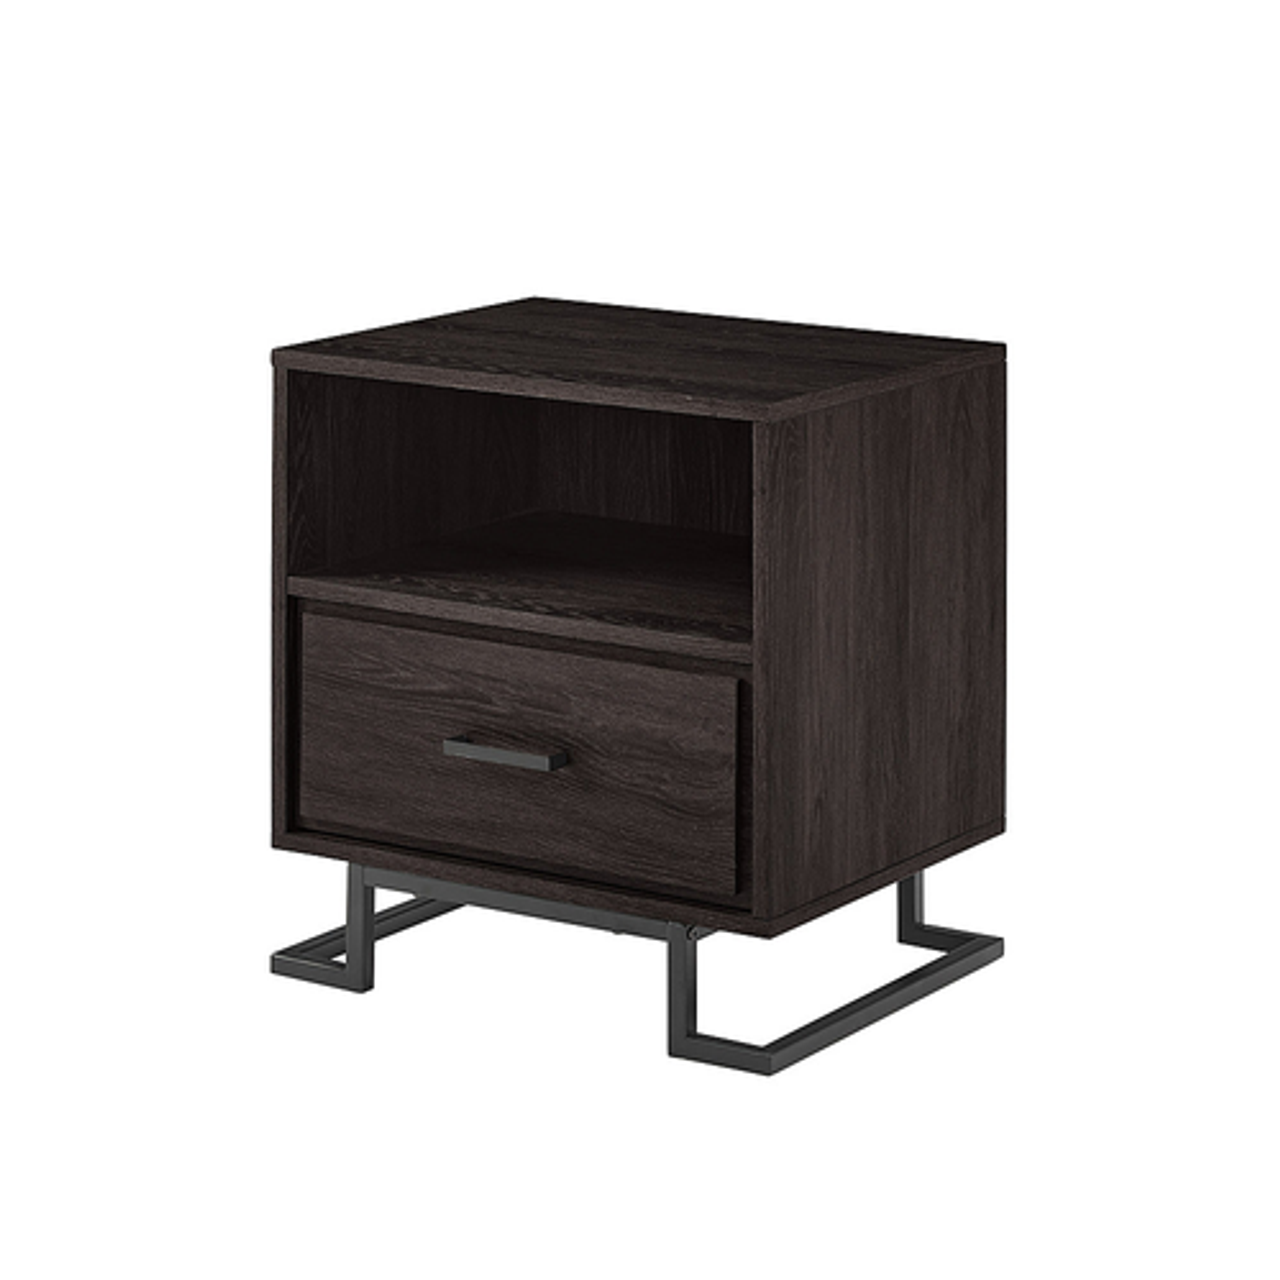 Walker Edison - Contemporary 1-Drawer Metal and Wood Nightstand - Charcoal